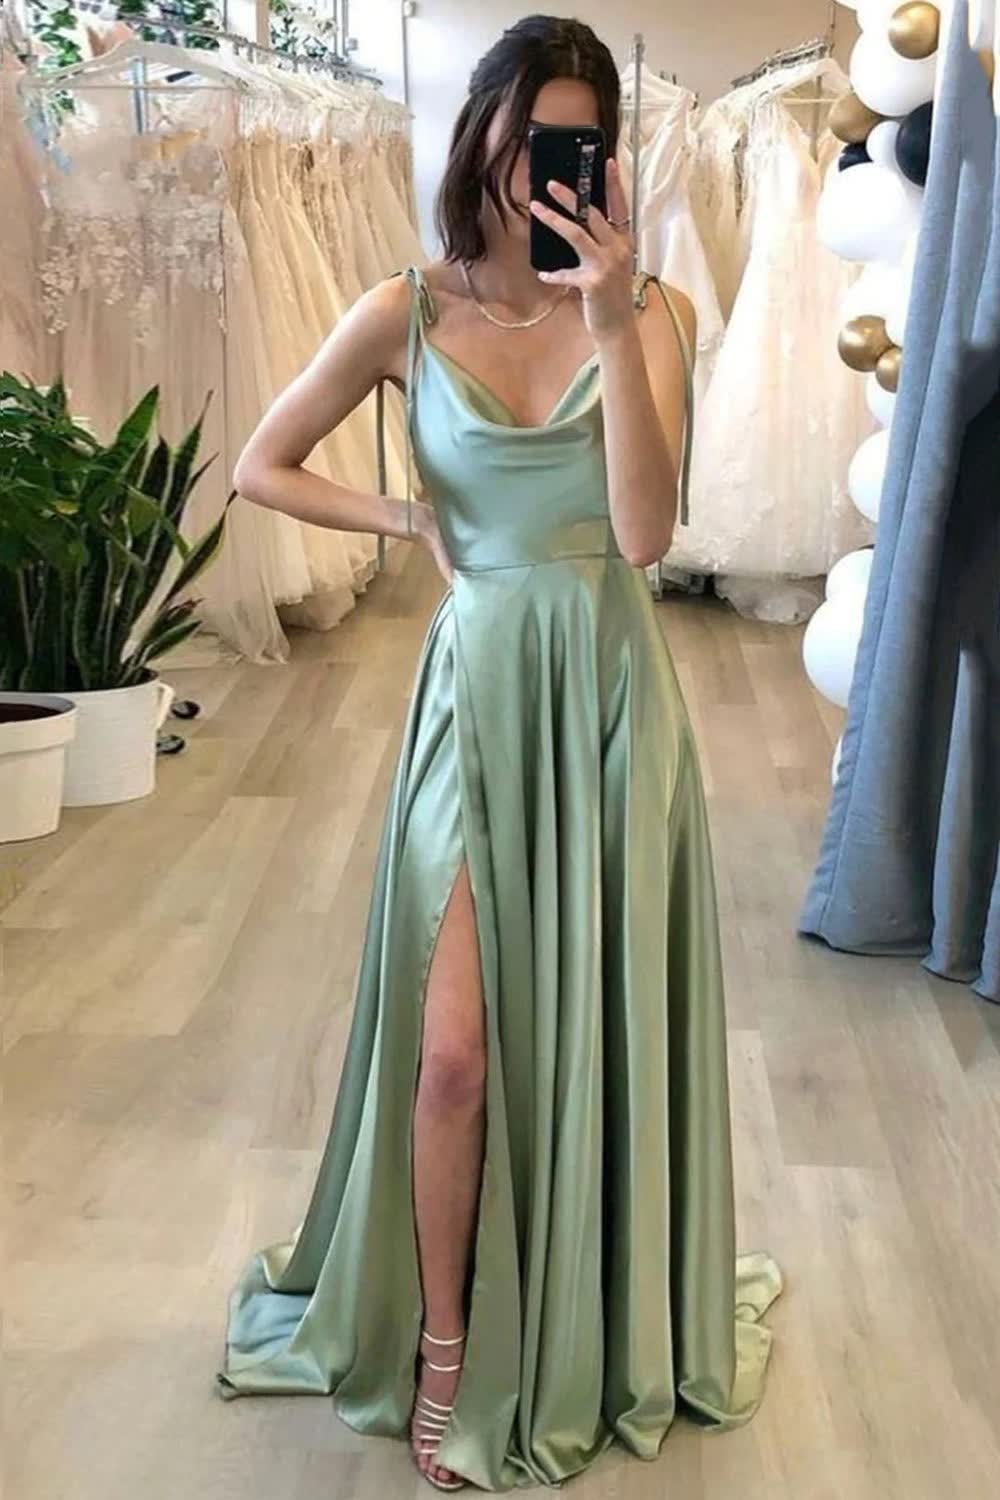 A Line Spaghetti Straps Light Green Long Corset Prom Dress with Silt Gowns, A Line Spaghetti Straps Light Green Long Prom Dress with Silt